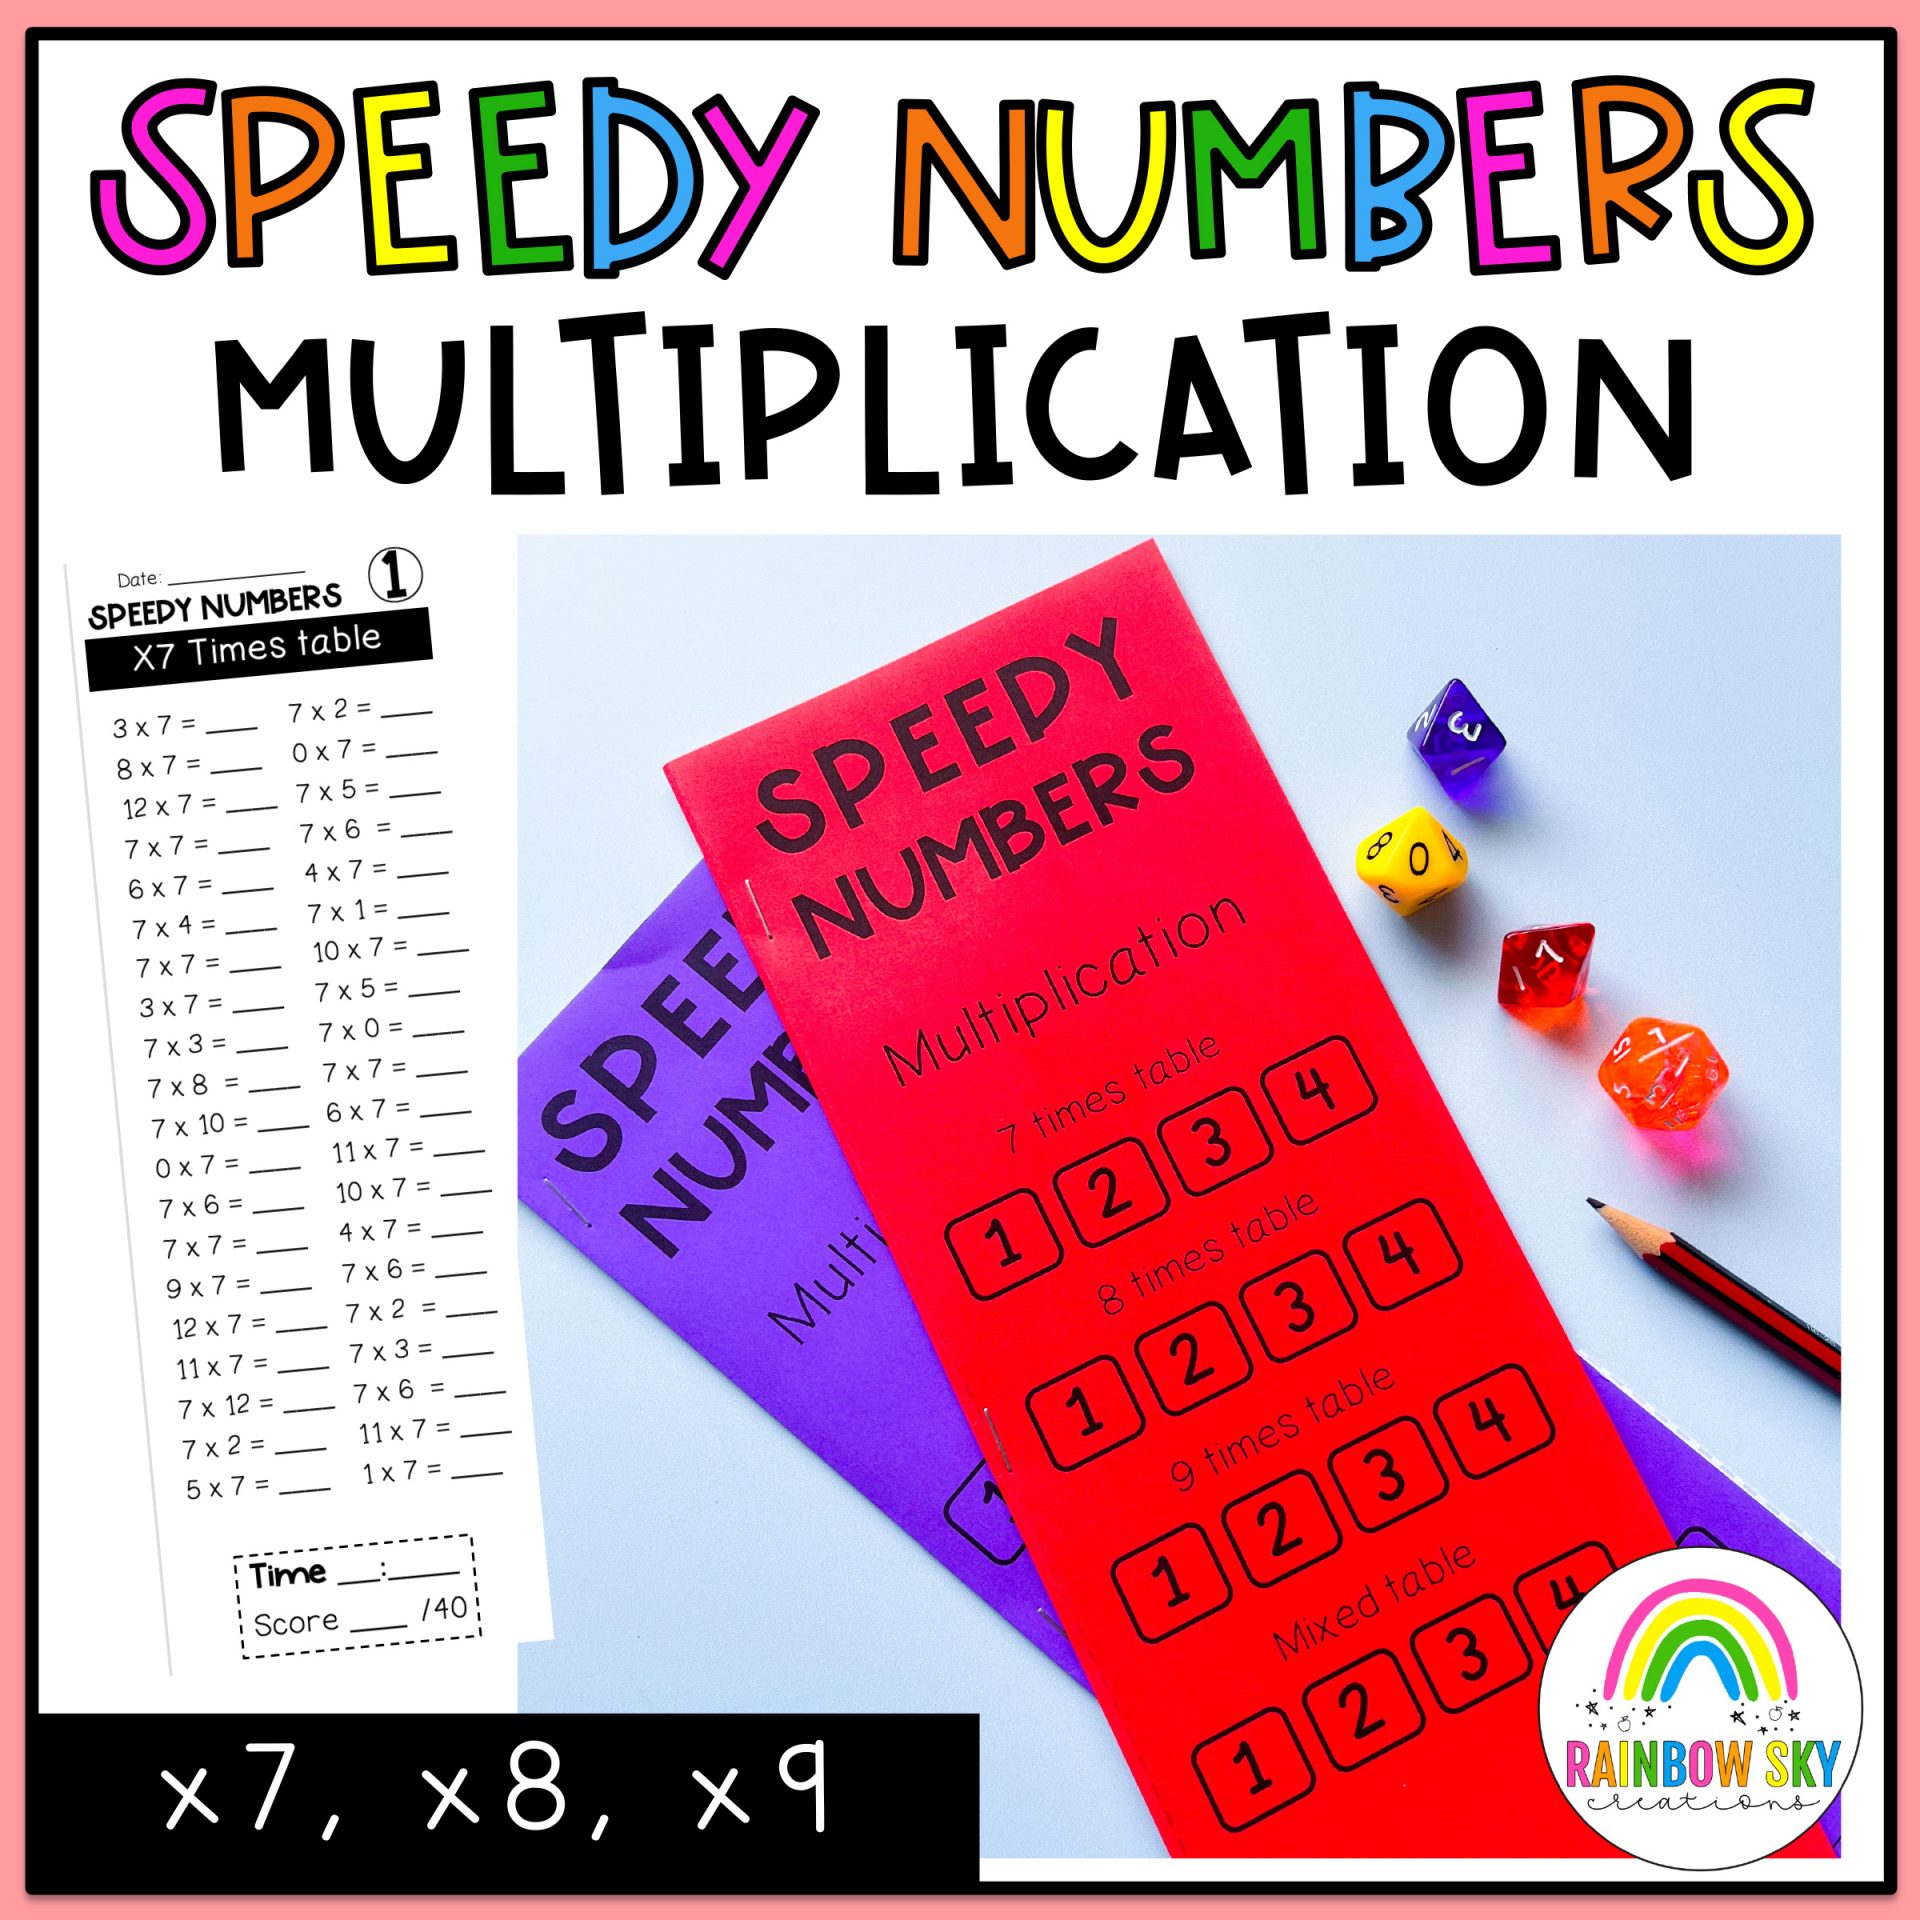 Multiplication Facts Speedy Numbers booklet | Multiplying by 7, 8, 9